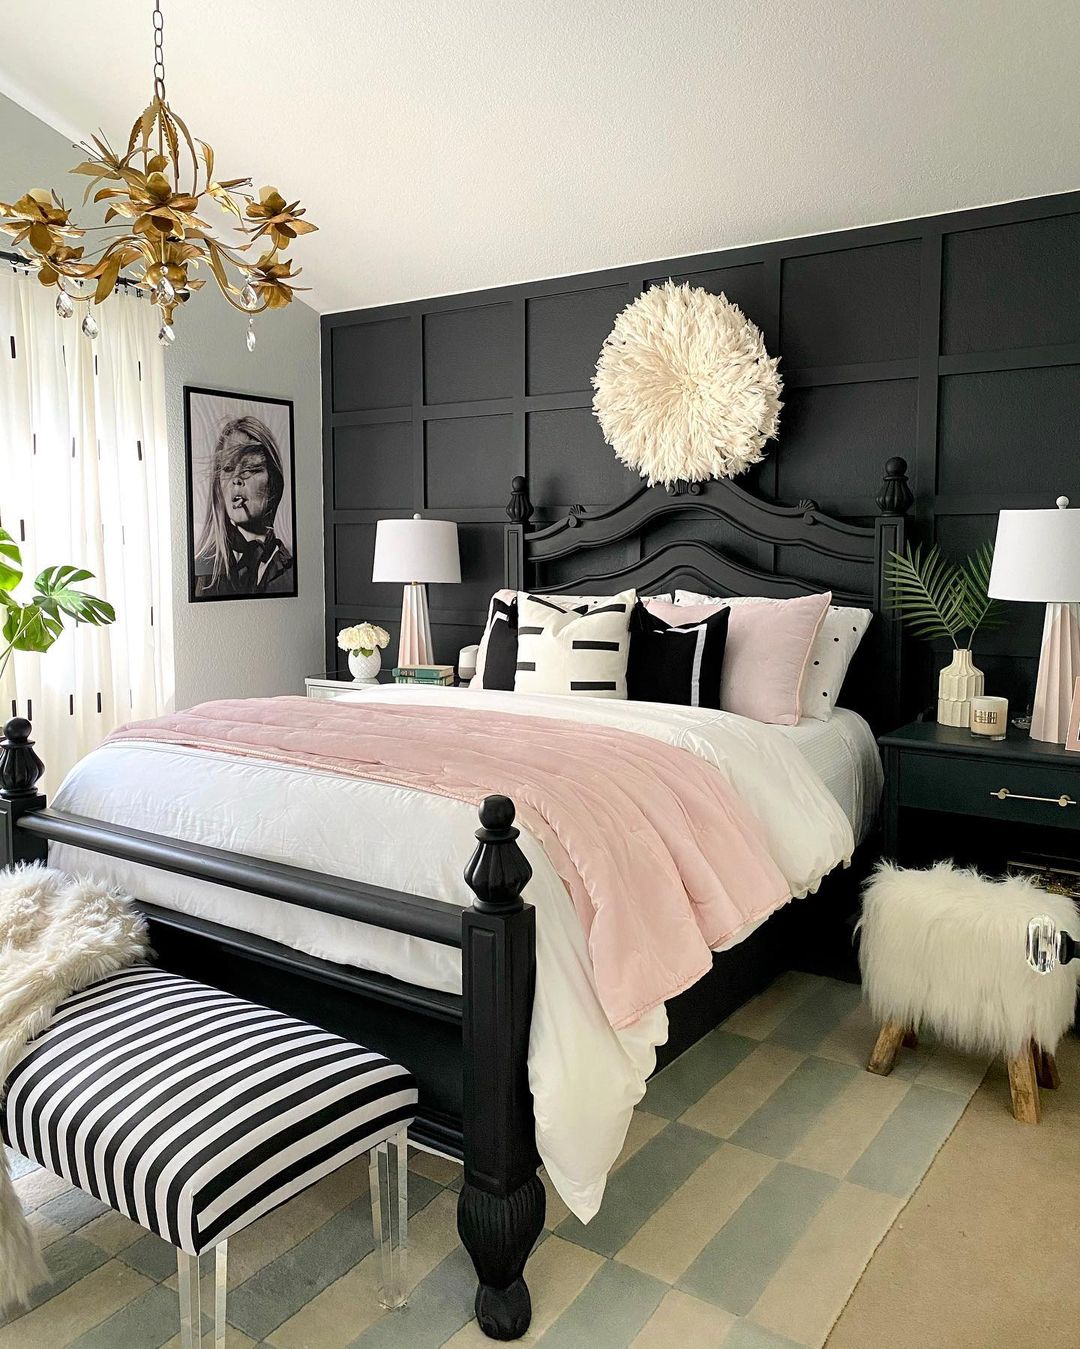 Trendy bedroom with a jet black accent wall.